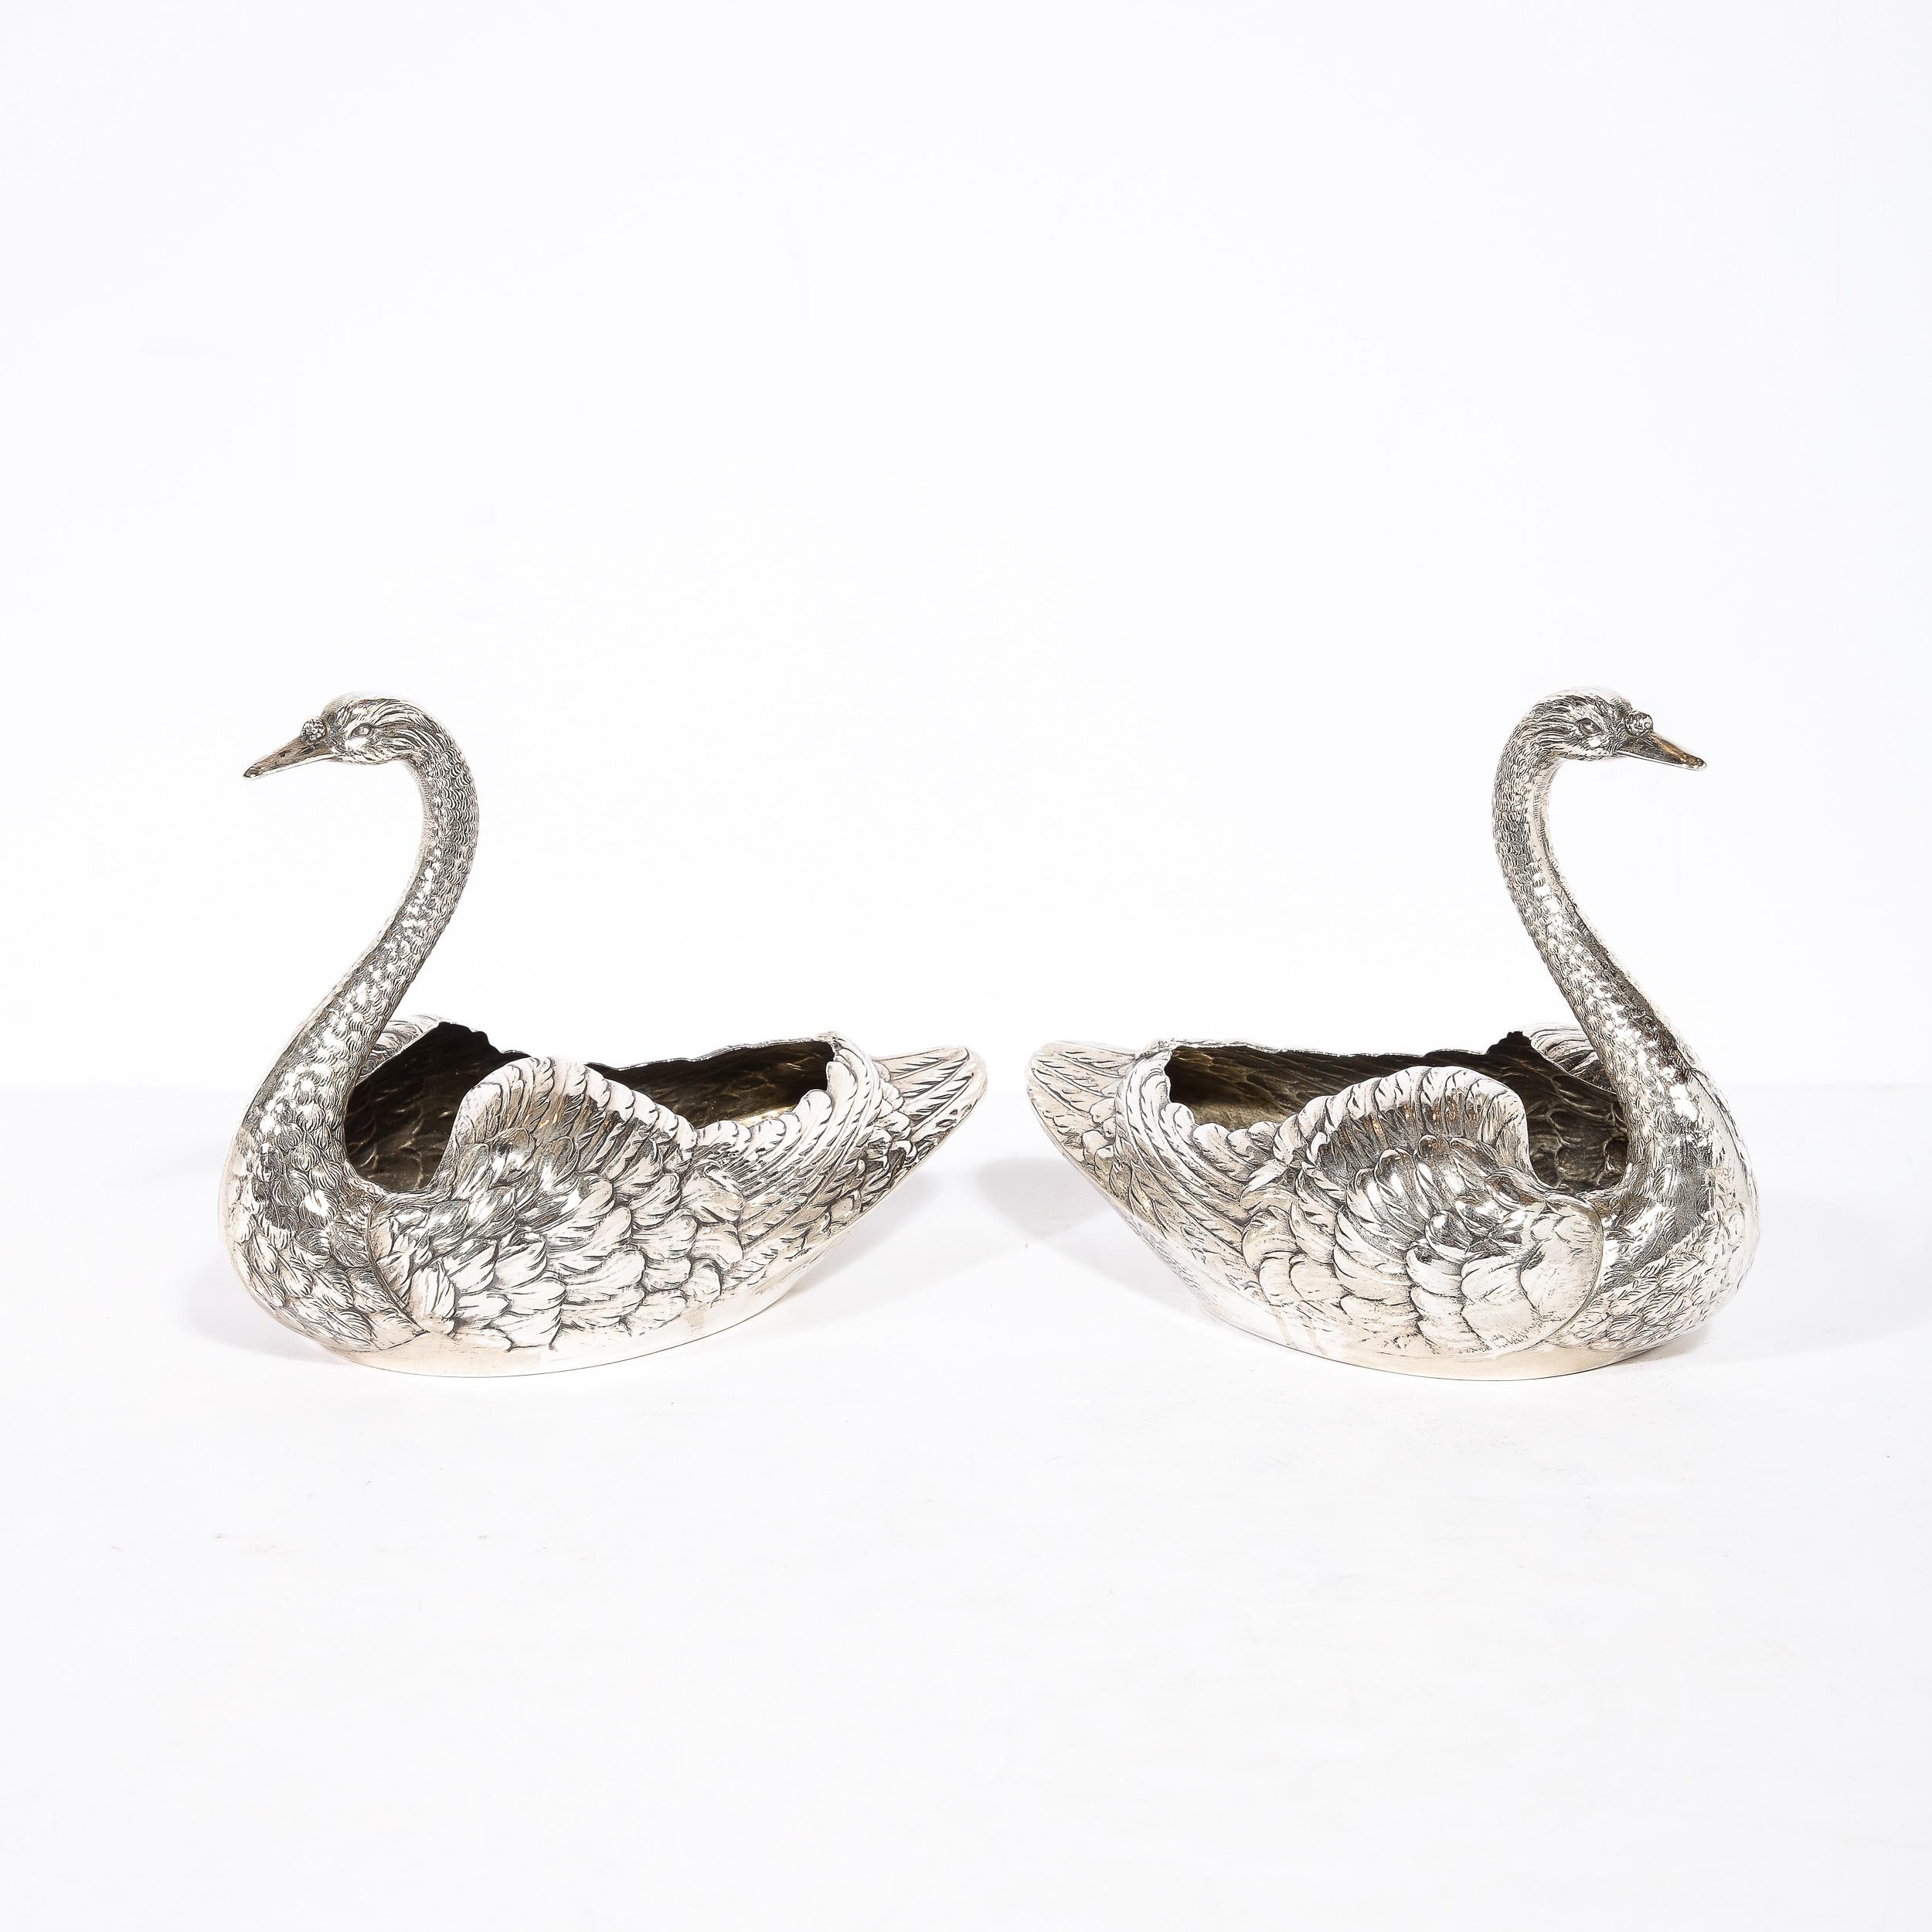 Early 20th Century Pair of Sterling Silver Swan Decorative Bowls Signed Gorham Sterling For Sale